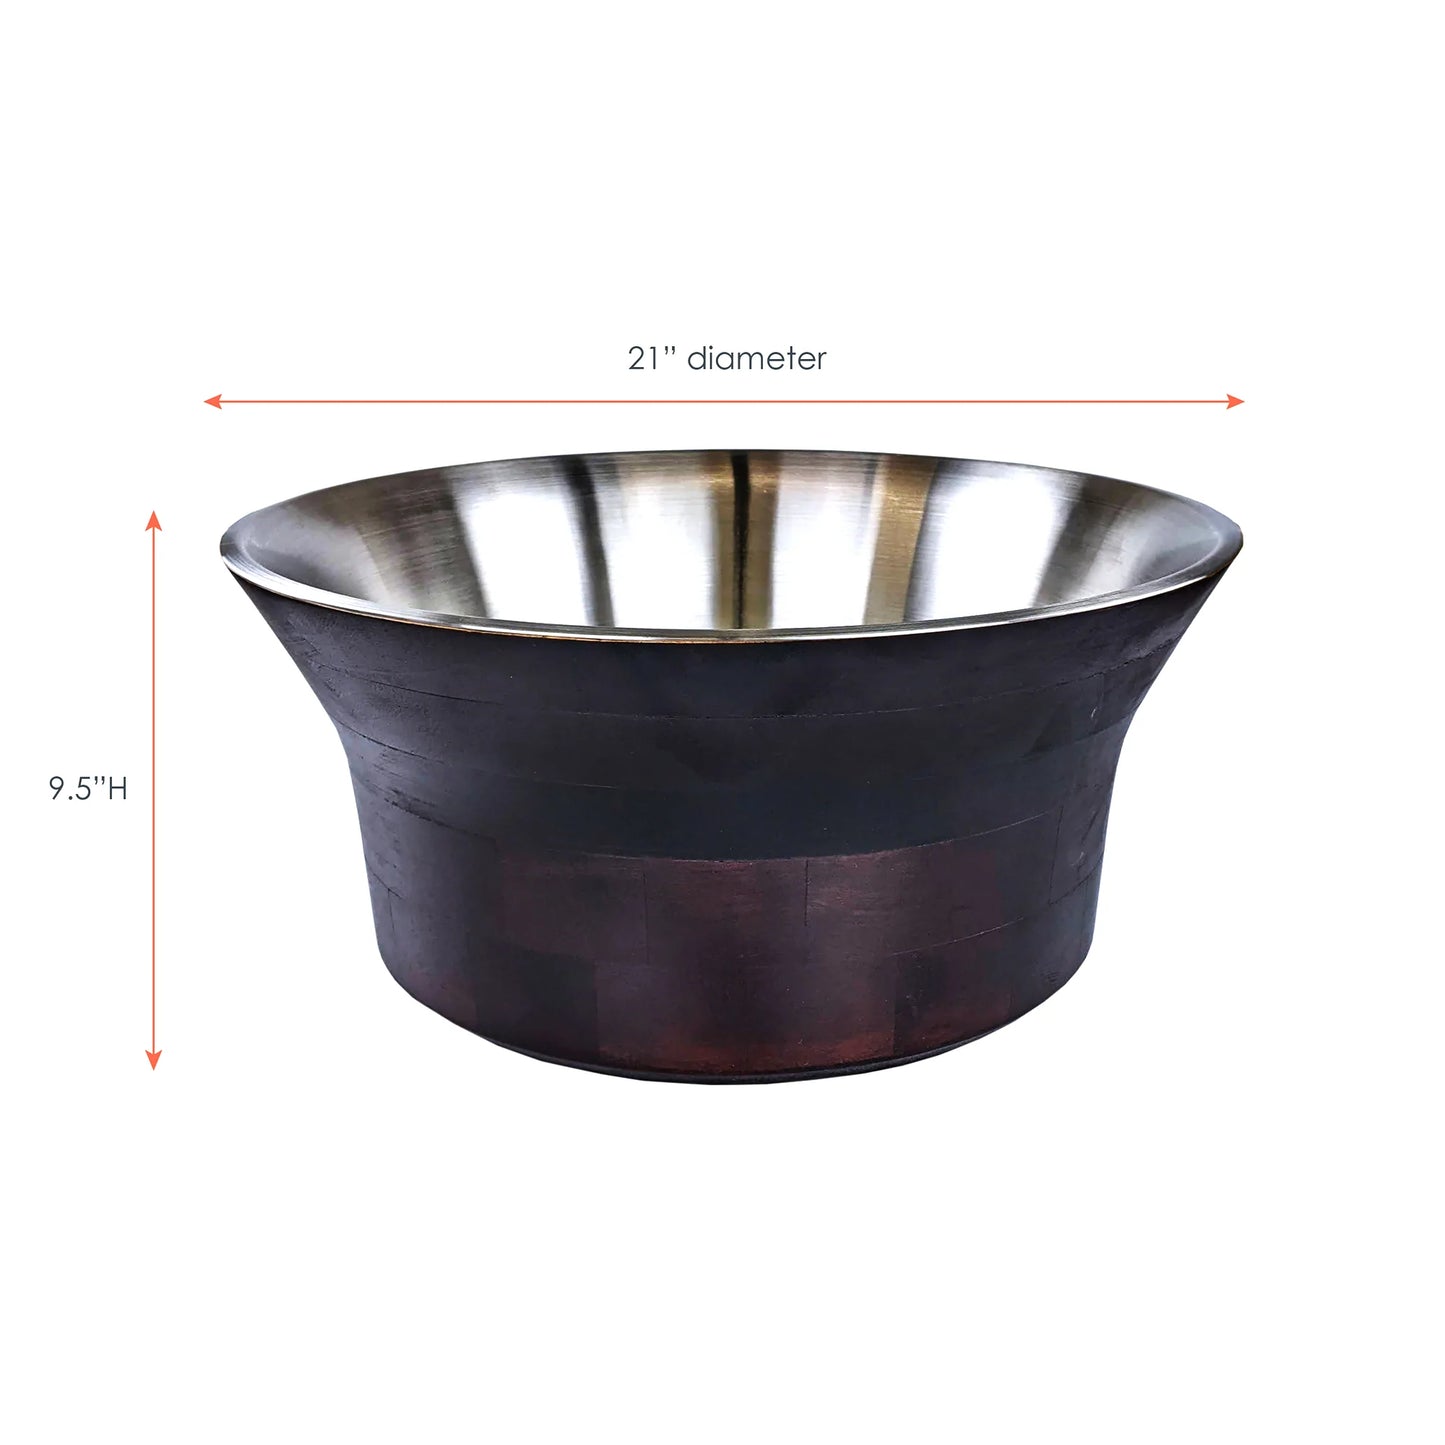 Large round party tub to hold and chill the most wine, beer, champagne, and other drinks for at home parties in the kitchen, dining room, or bar.  Made of stainless steel metal and elegant dark finish mango wood.  100% leak proof.